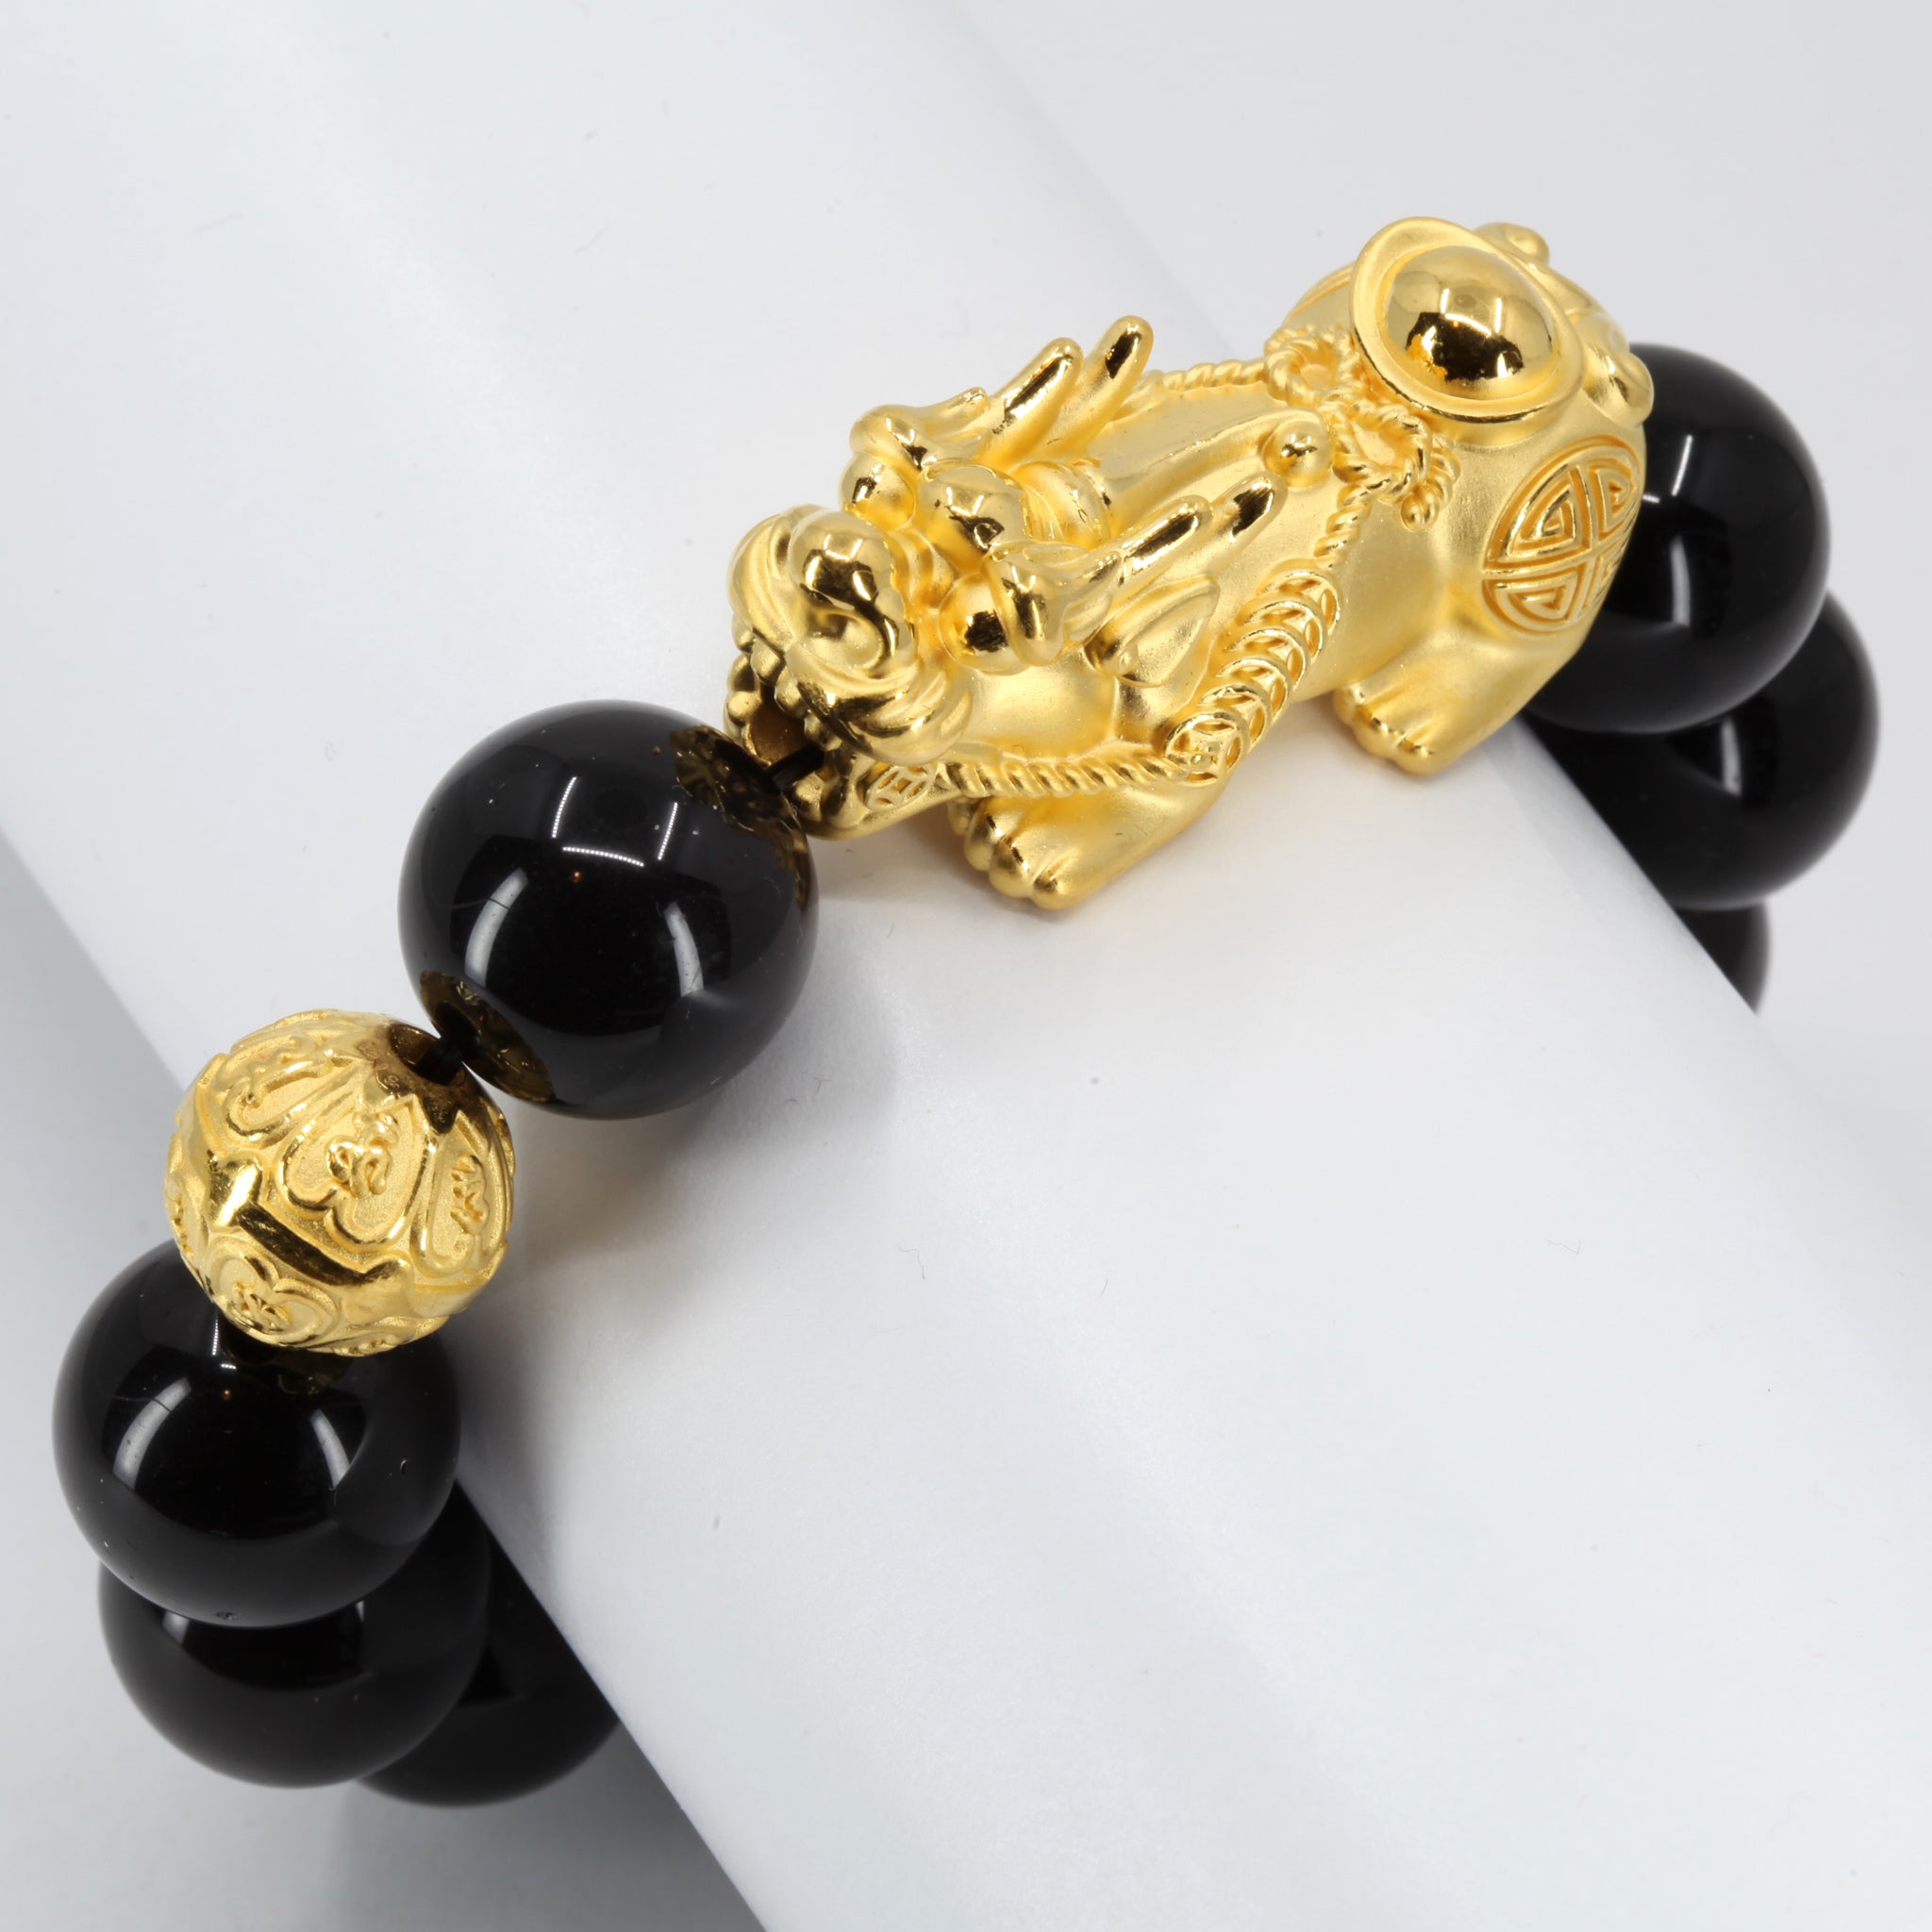 24K Gold Pixiu Bracelet for Wealth and Luck With Mantra Beads and Black  Obsidian Stone, Fengshui Lucky Fortune Protection Piyao Bracelets - Etsy